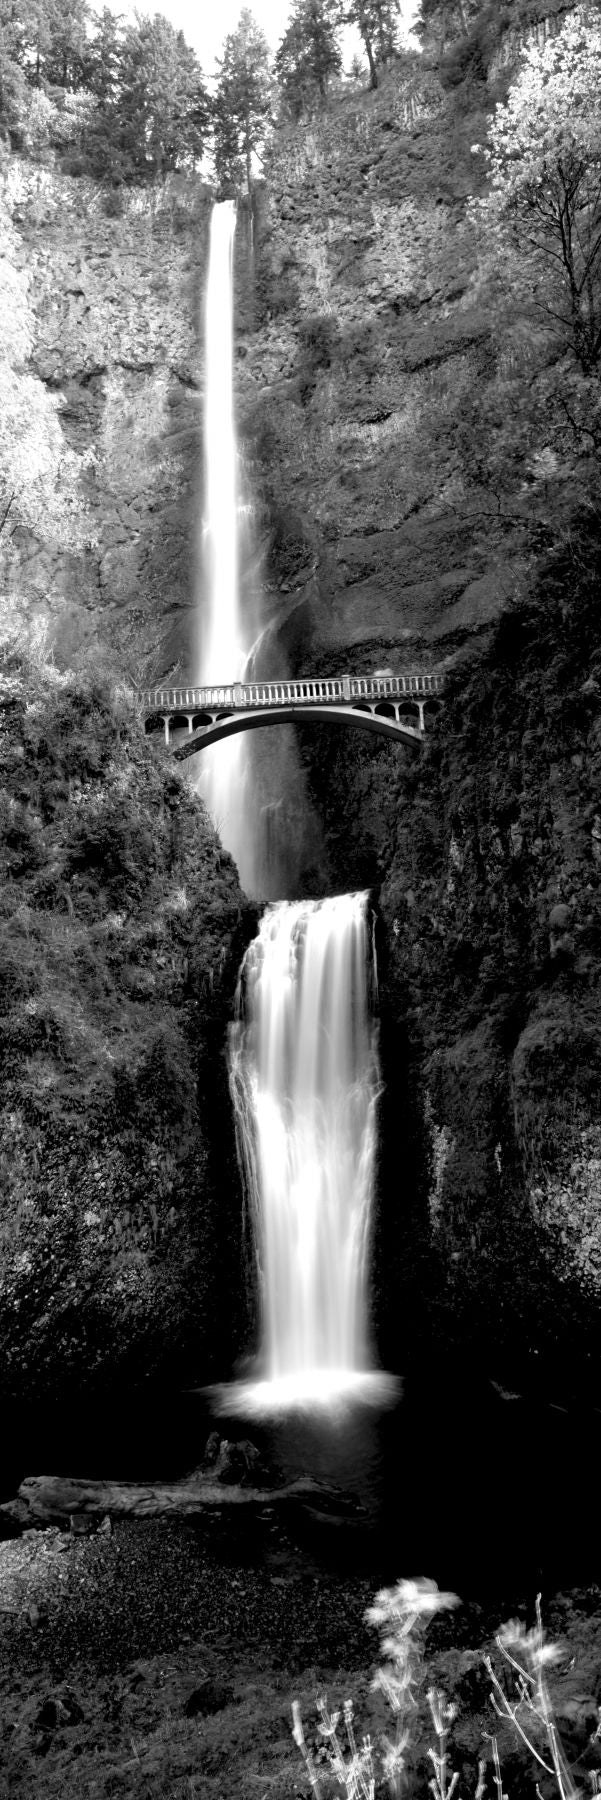 Waterfall in a forest, Multnomah Falls, Columbia River Gorge, Oregon, USA